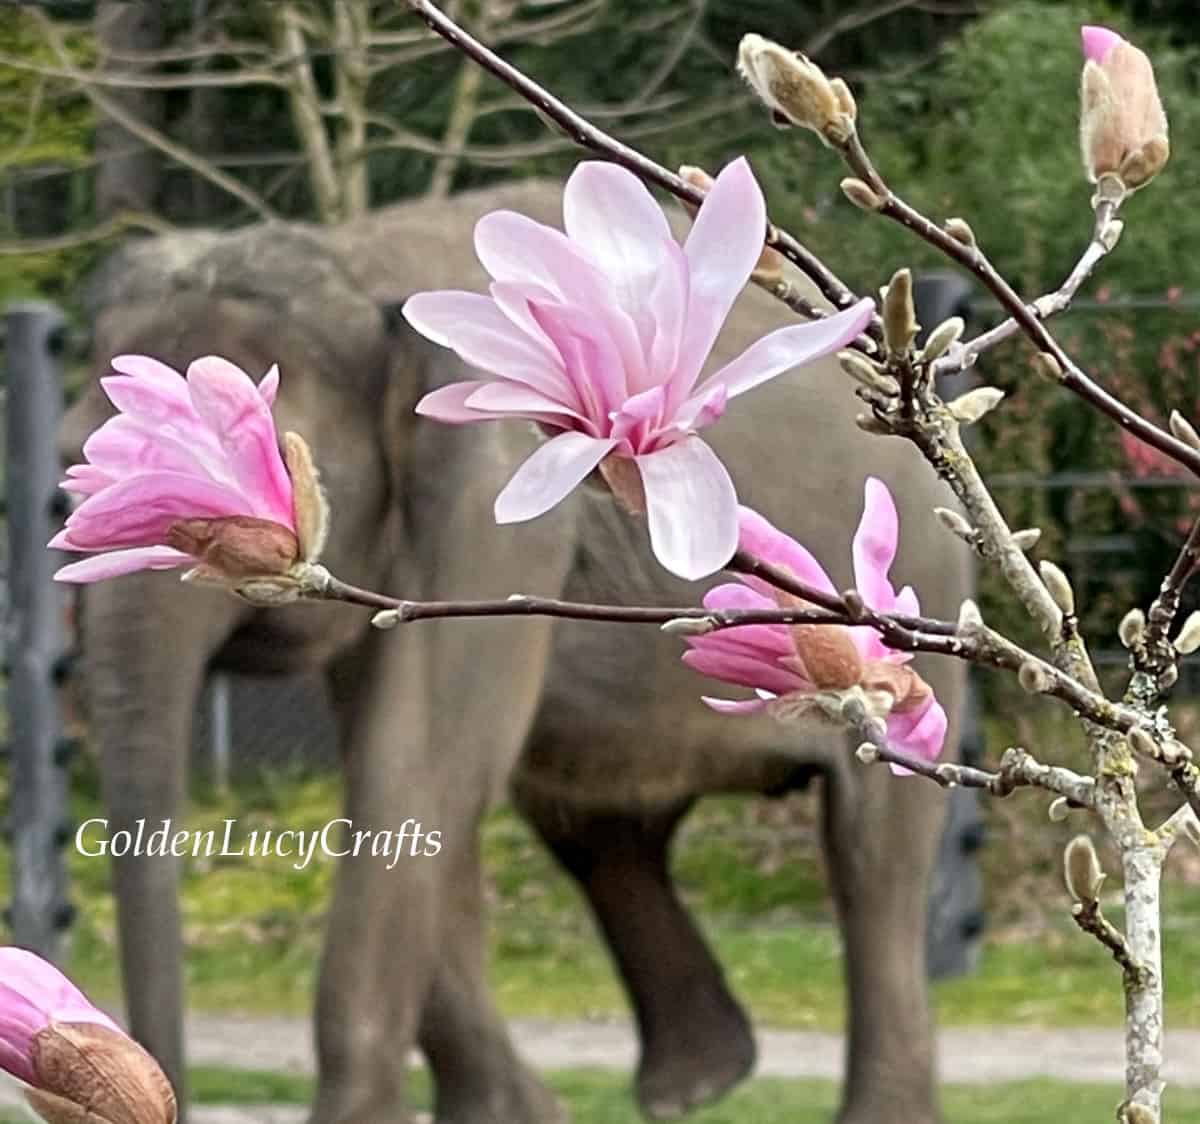 Light pink magnolia plant, elephant in the background.